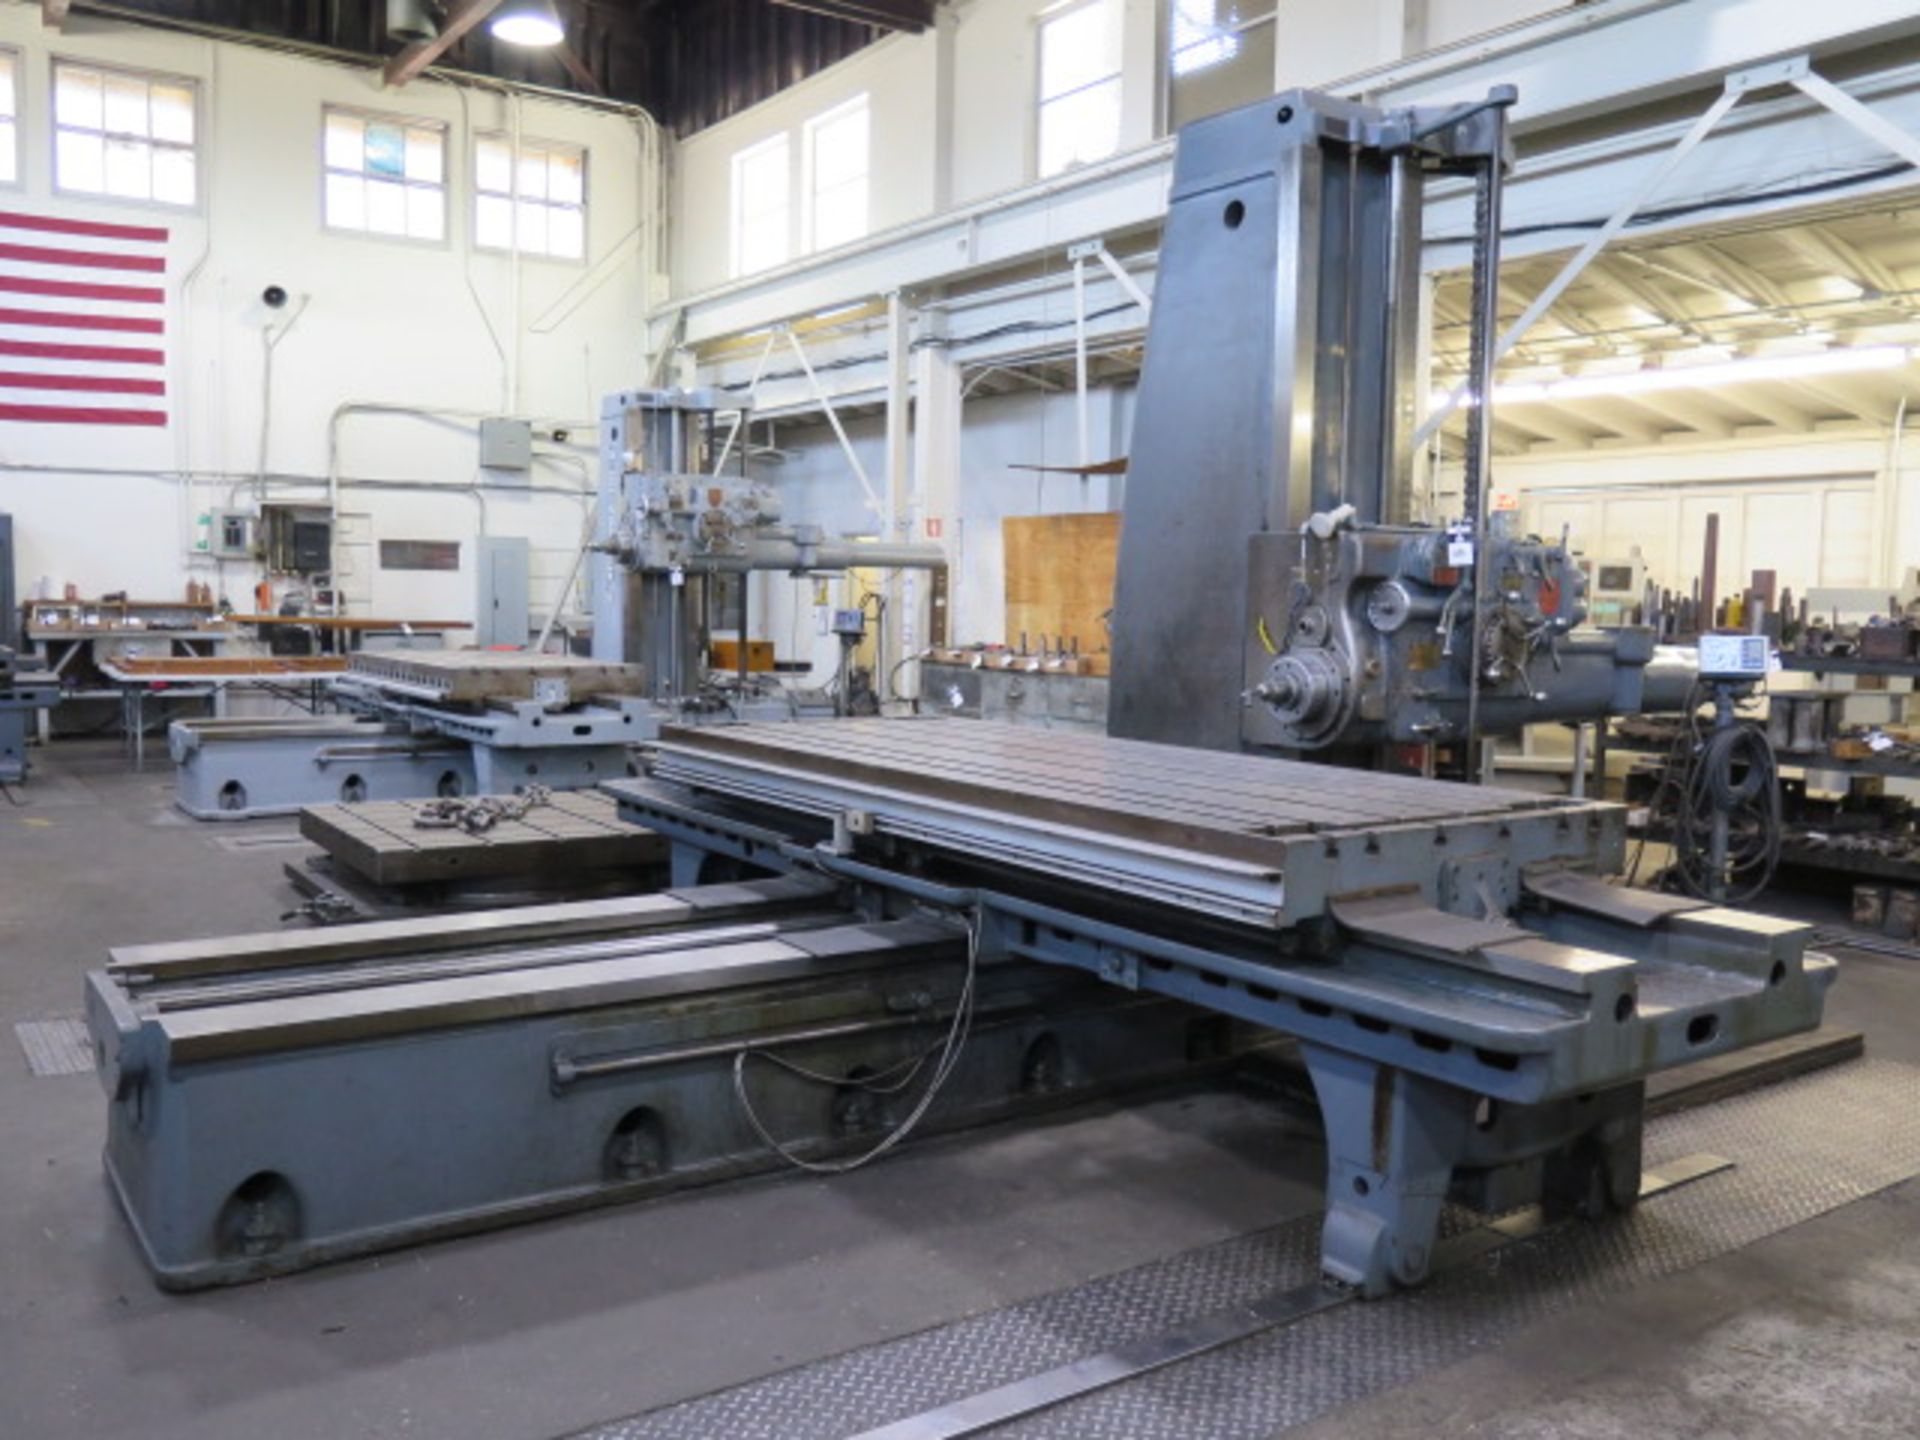 Giddings & Lewis 350-T Horizontal Boring Mill s/n 5182 w/ Fagor Innova 3-Axis DRO, SOLD AS IS